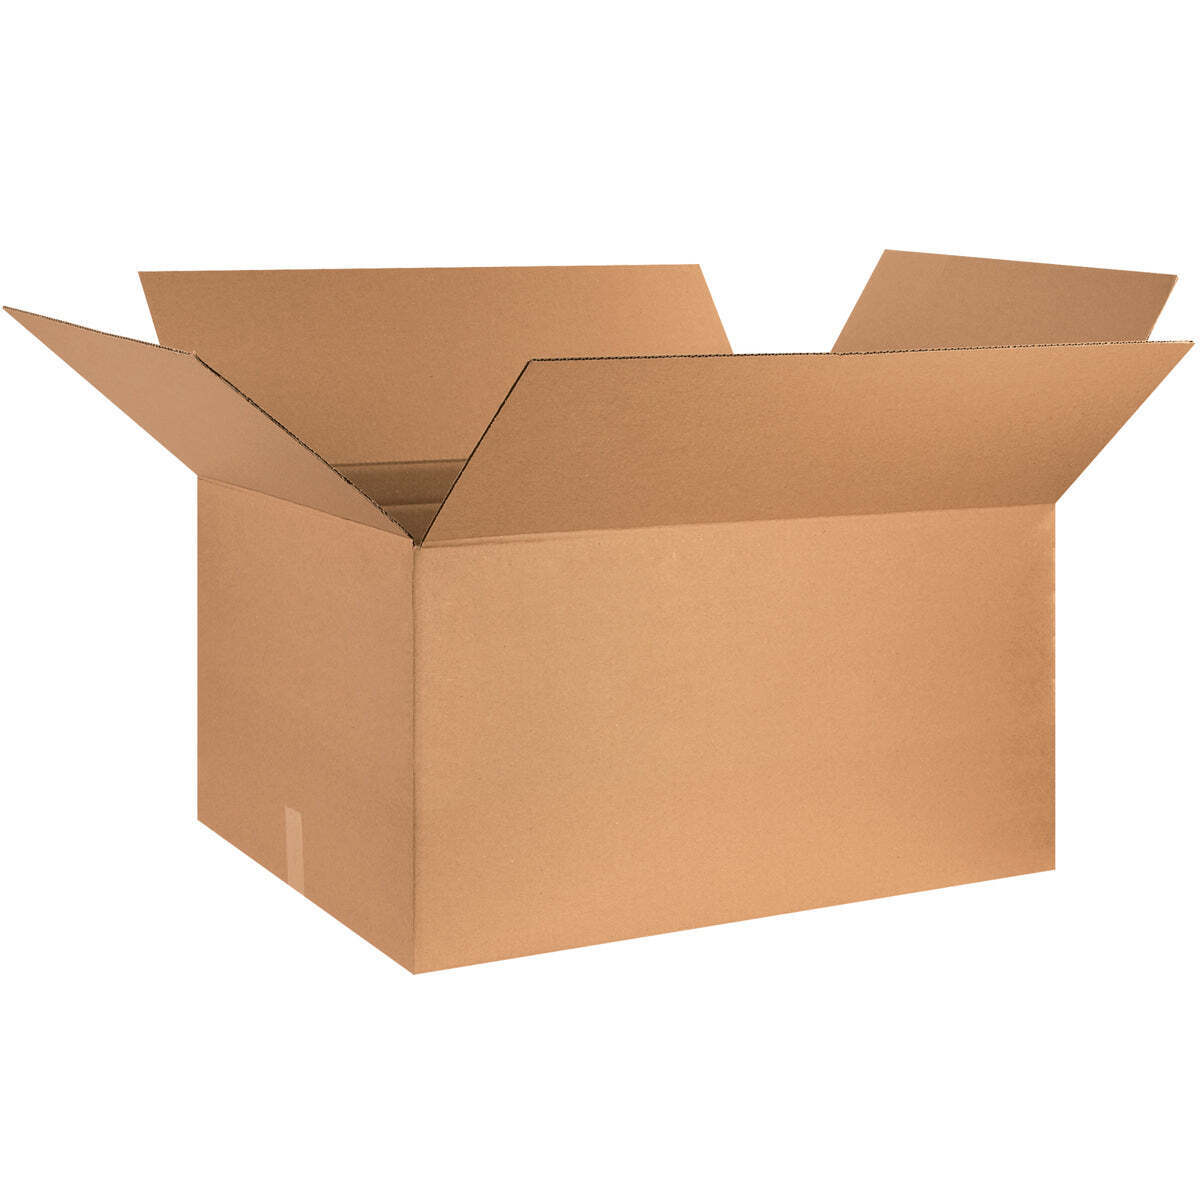 32x18x18 Size Shipping and Packing Box 15 Pack Bundle